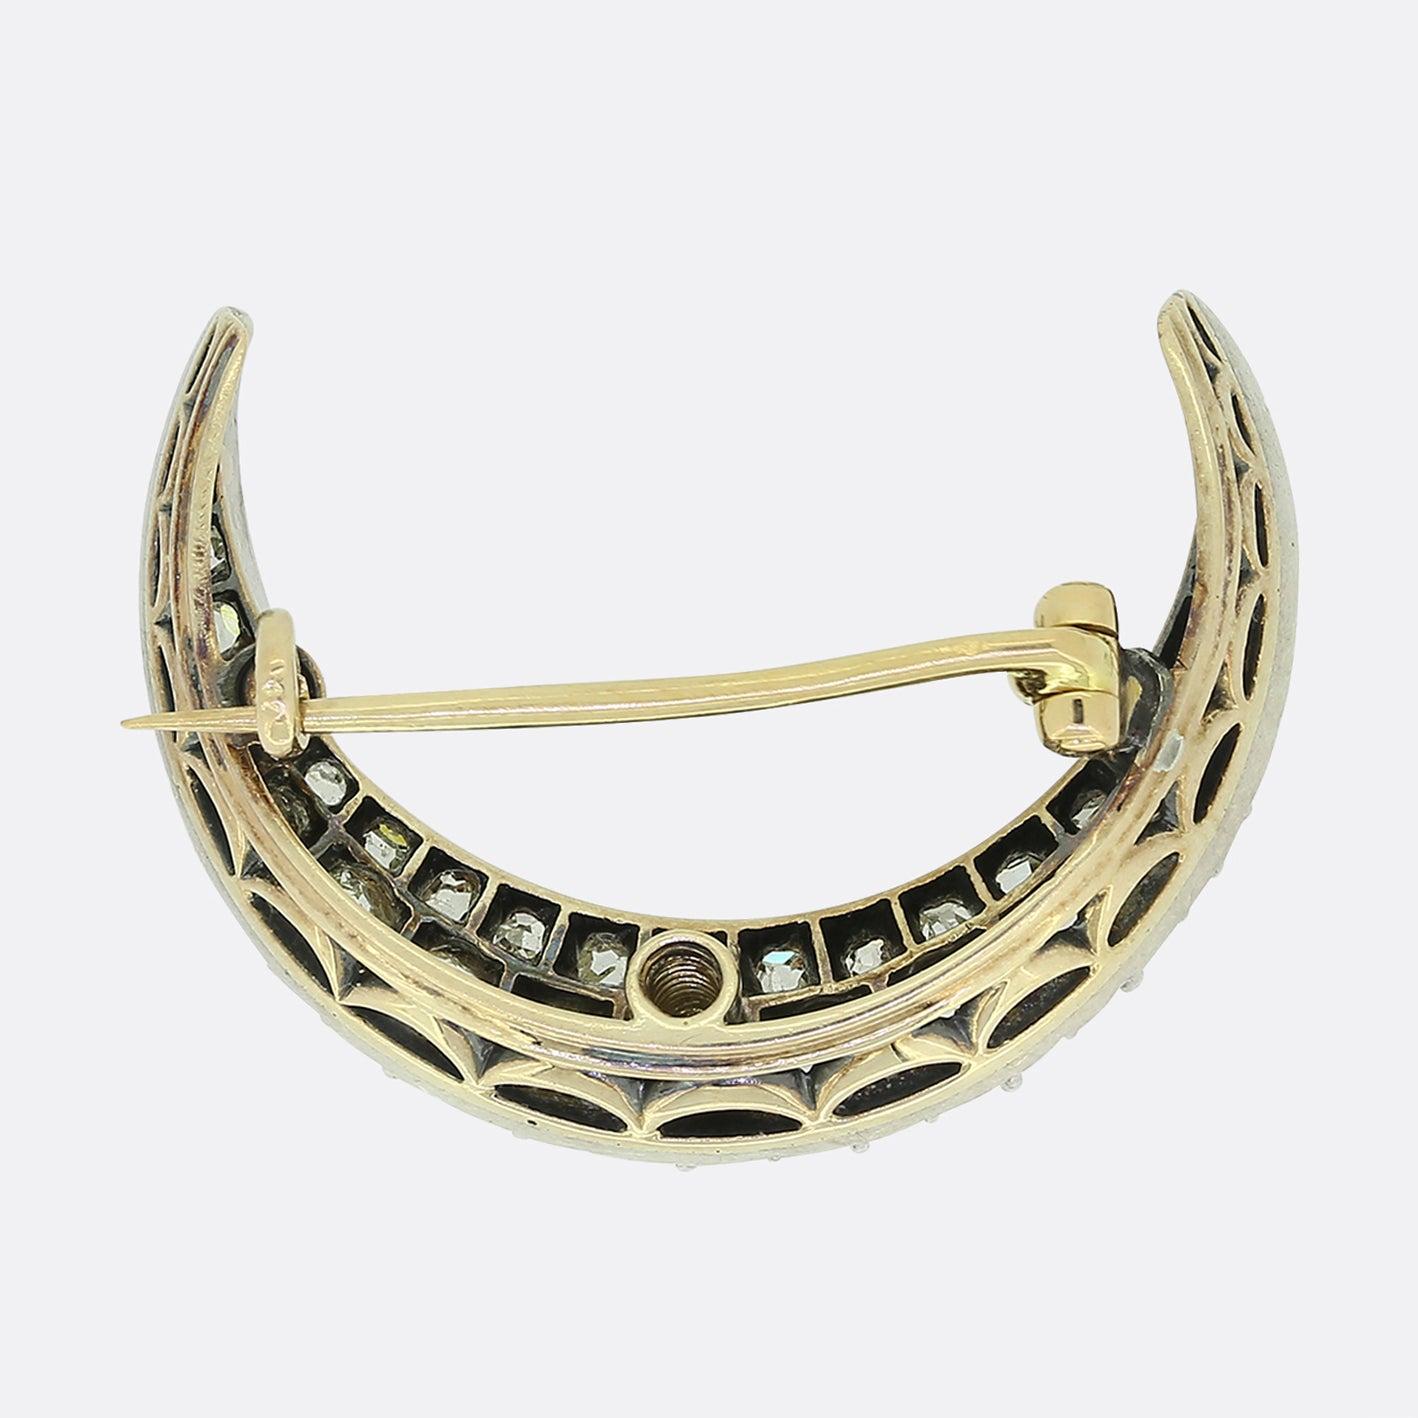 Here we have a charming diamond brooch dating back to the Victorian period. This antique piece has been crafted from old gold and silver into the shape of a crescent moon. This framework has then been set with two rows of chunky round faceted old